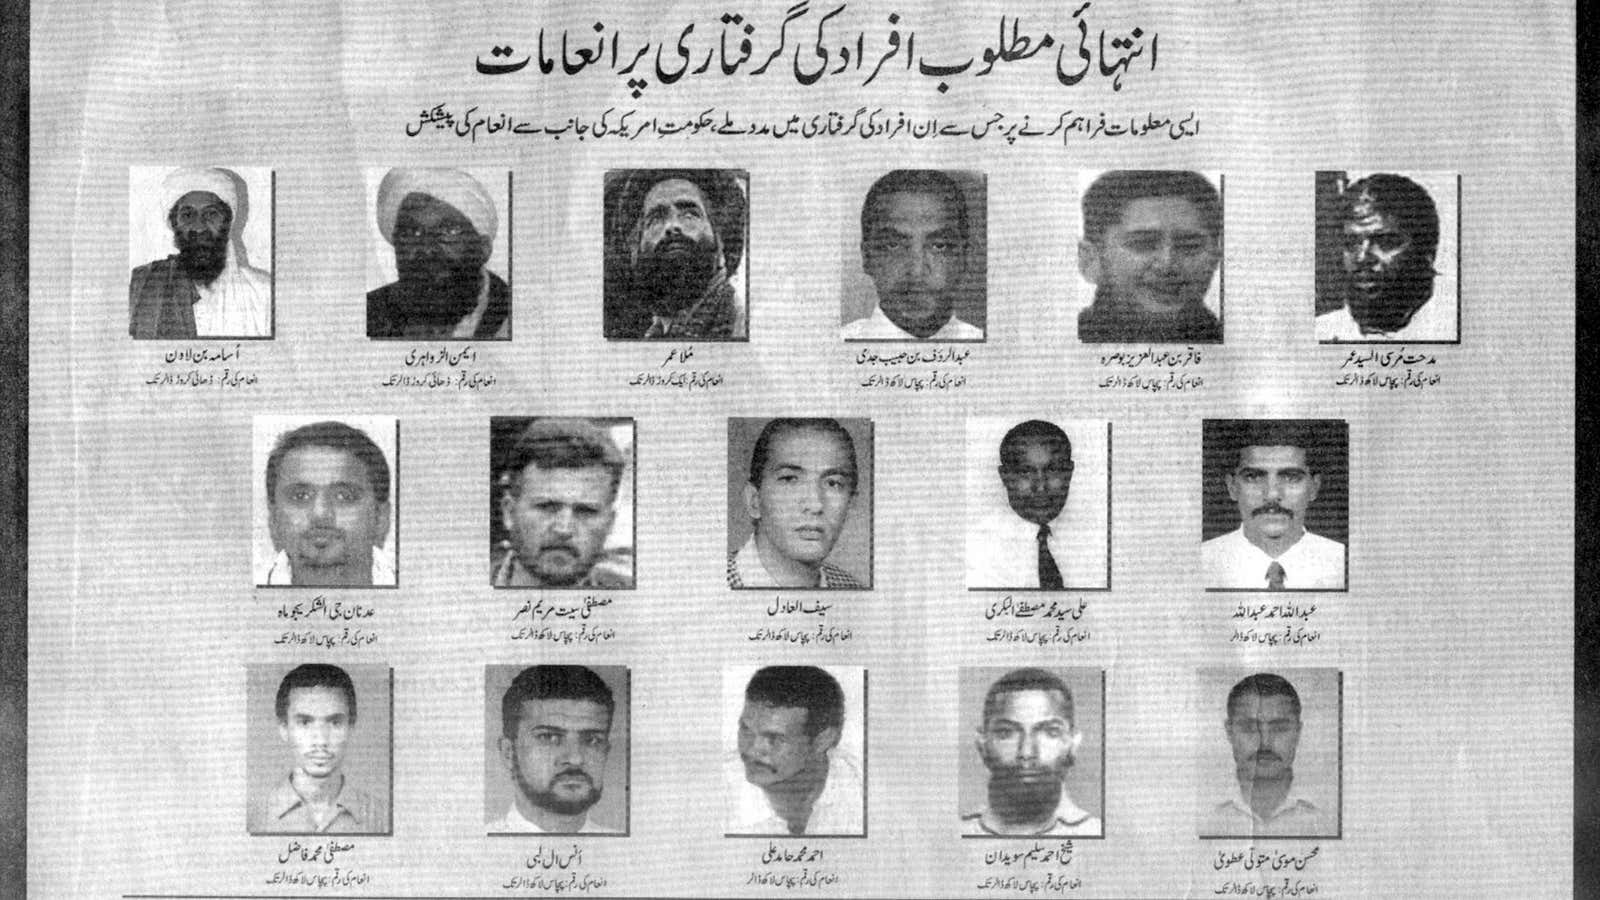 A notice in a Pakistani newspaper listing the awards for capturing militants. $10 million was being offered for Mullah Omar (third from left, top row).